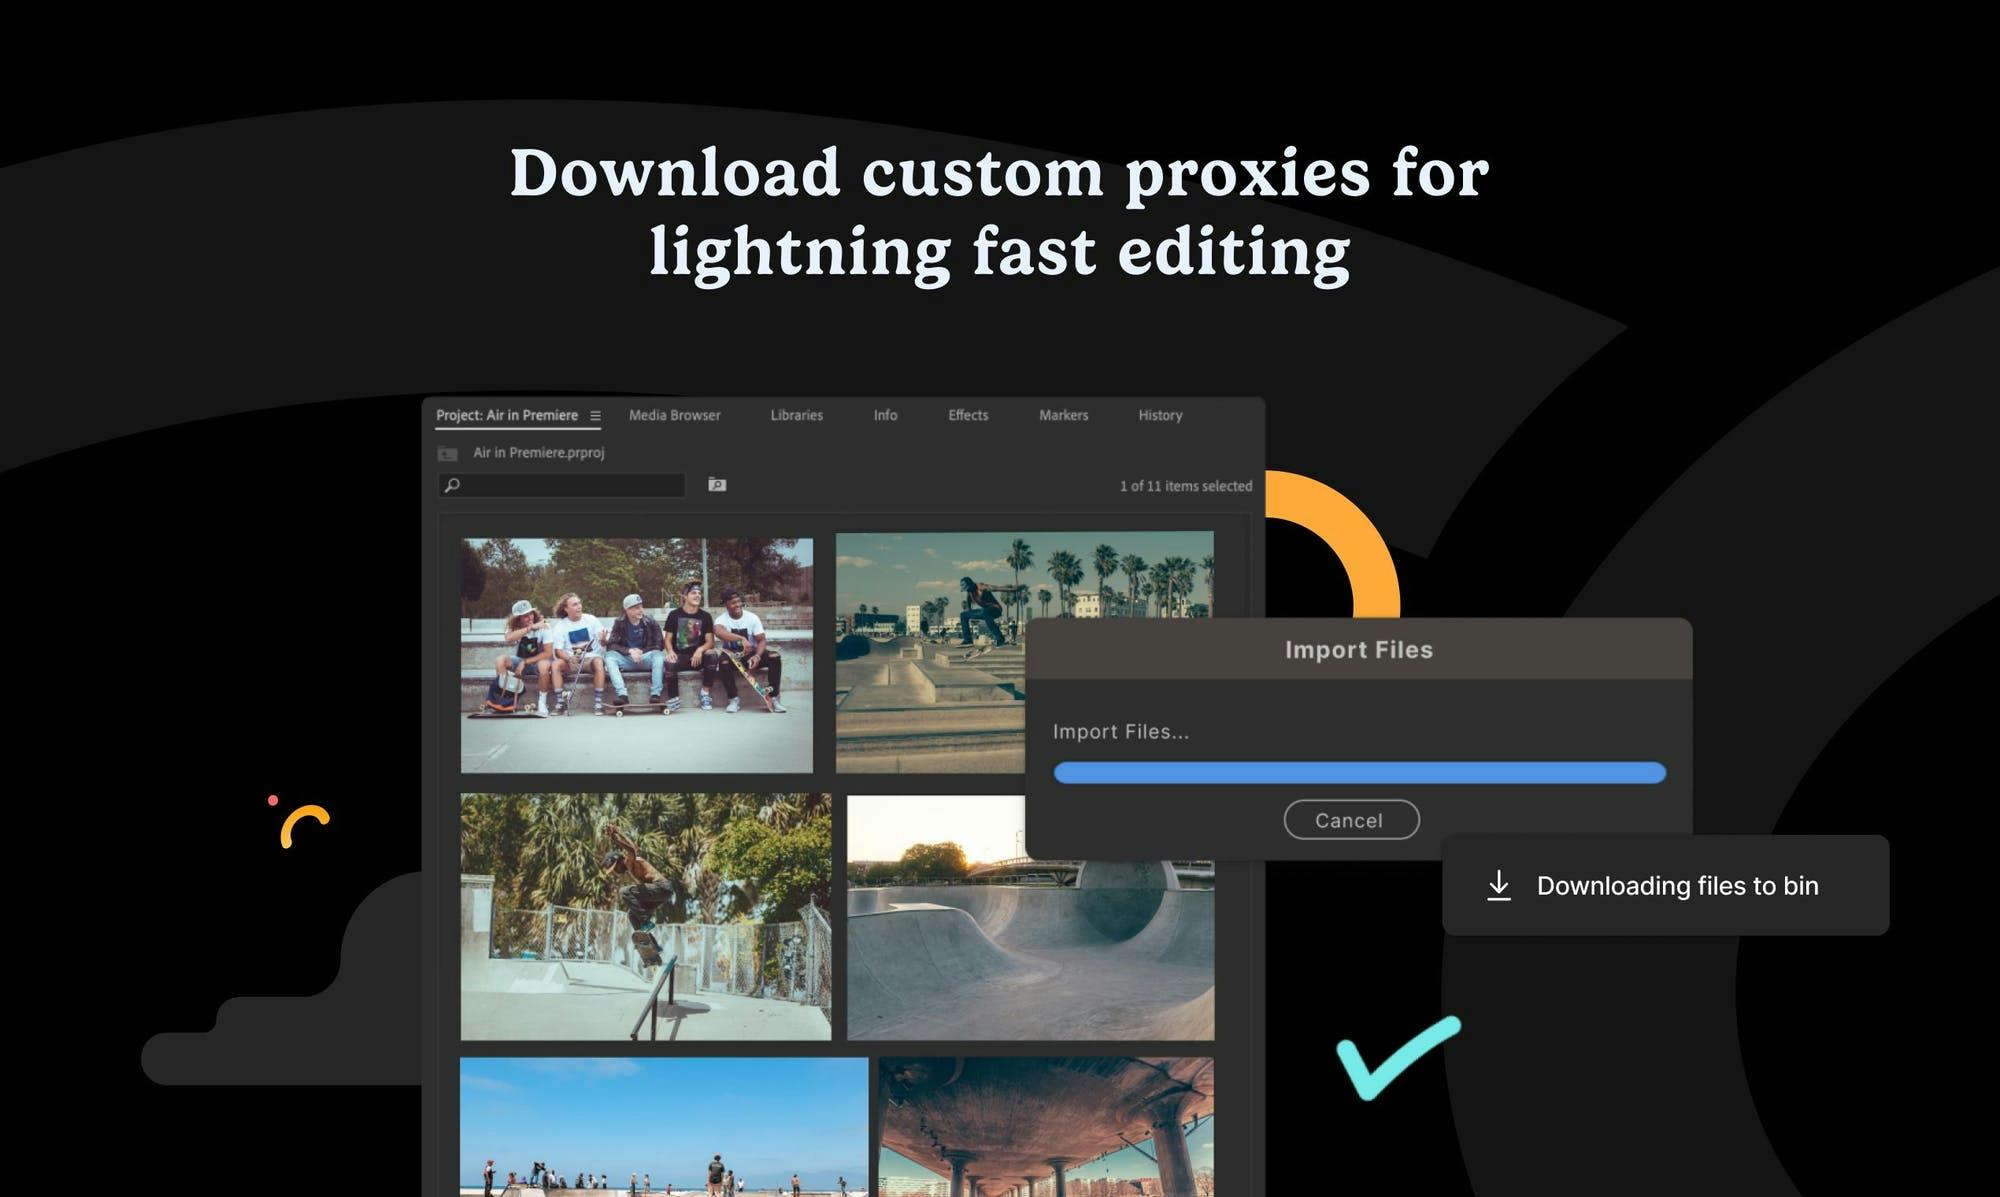 Download custom proxies for lightning fast editing